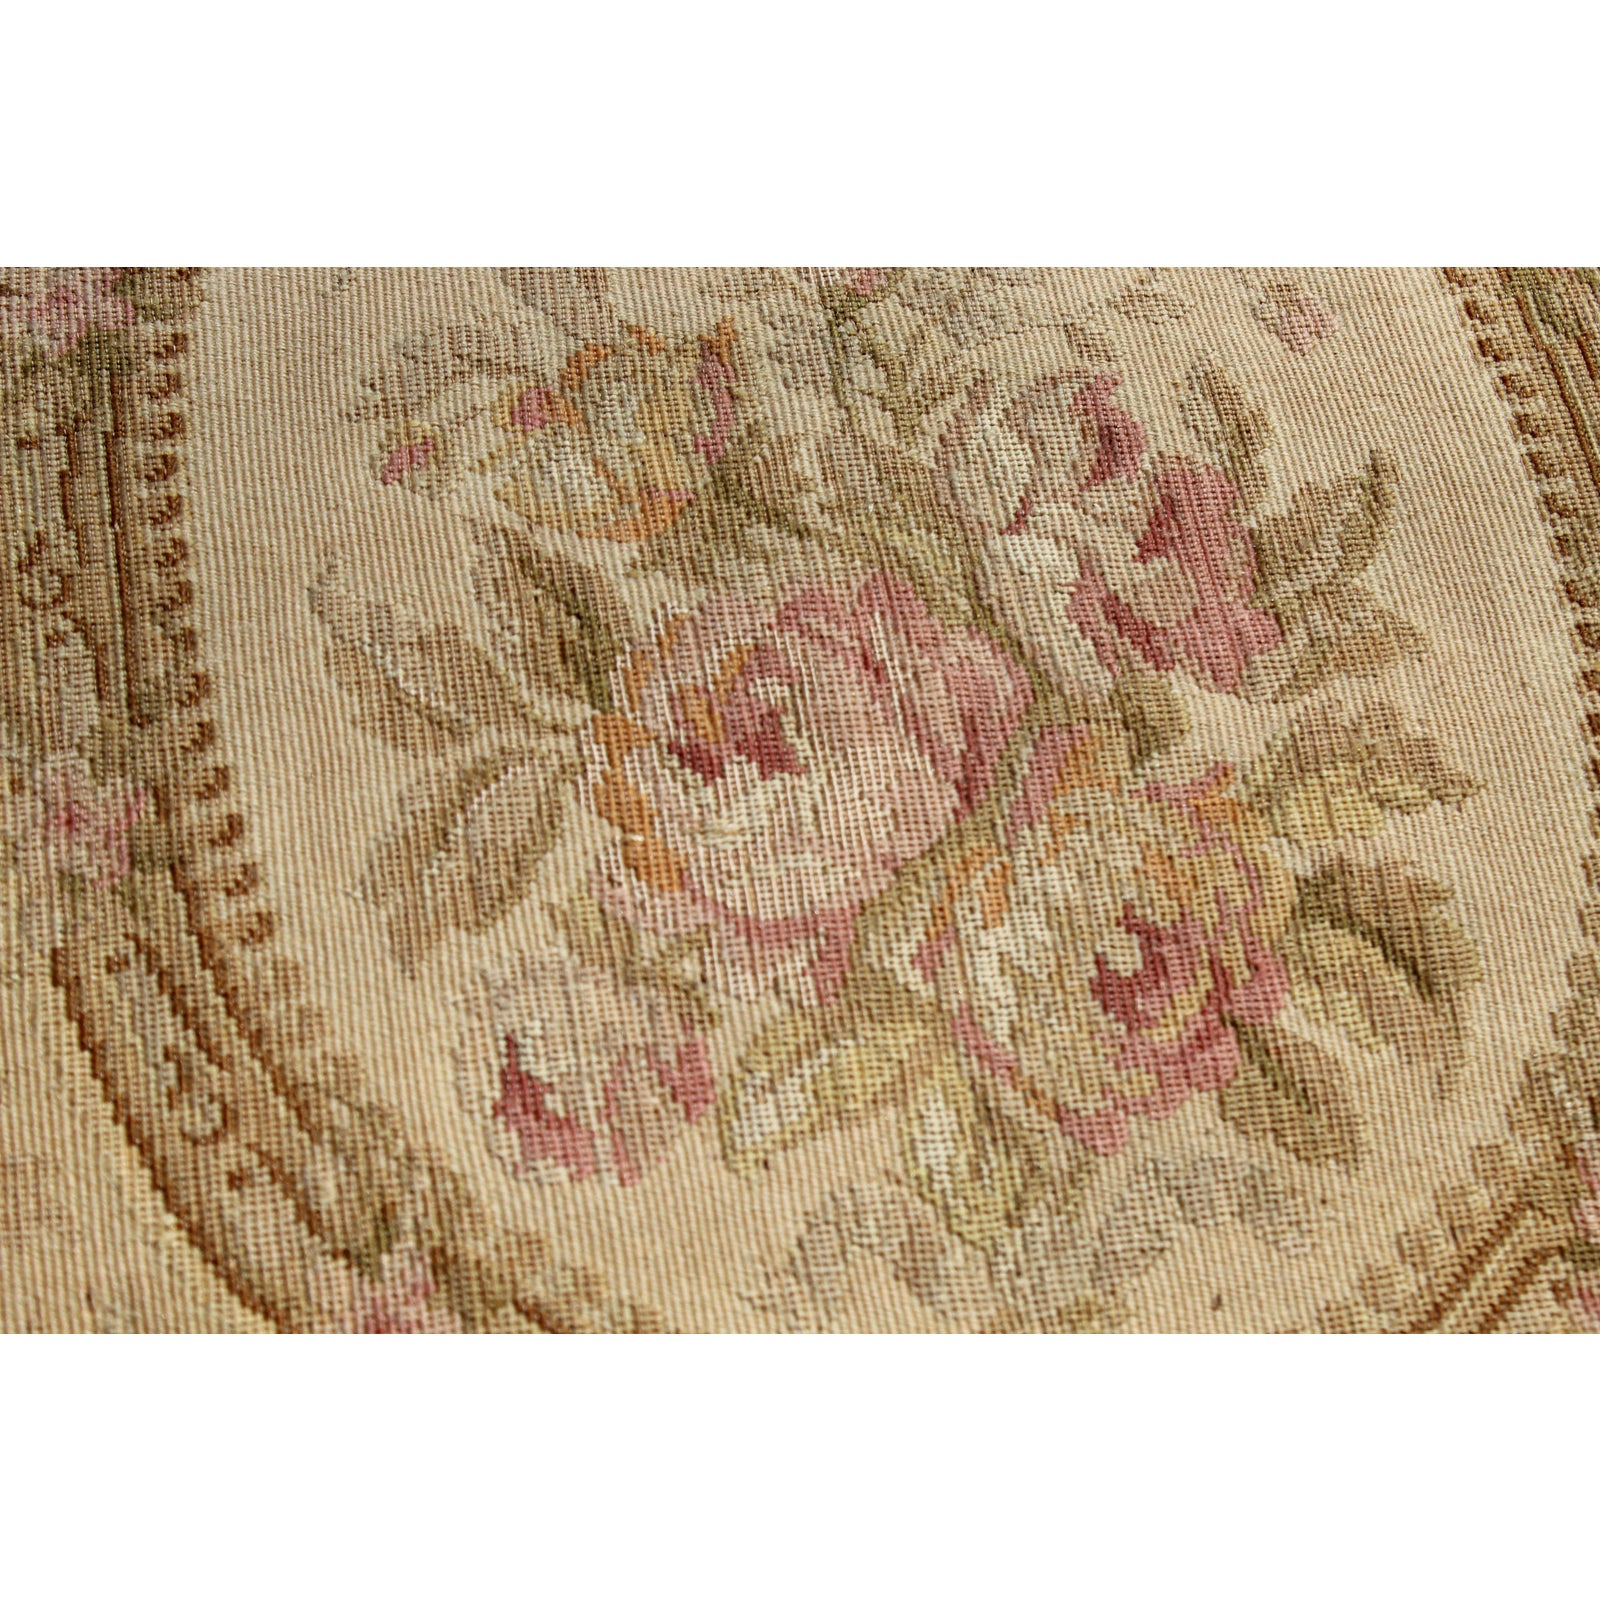 late-19th-century-antique-french-aubusson-pillow-8346